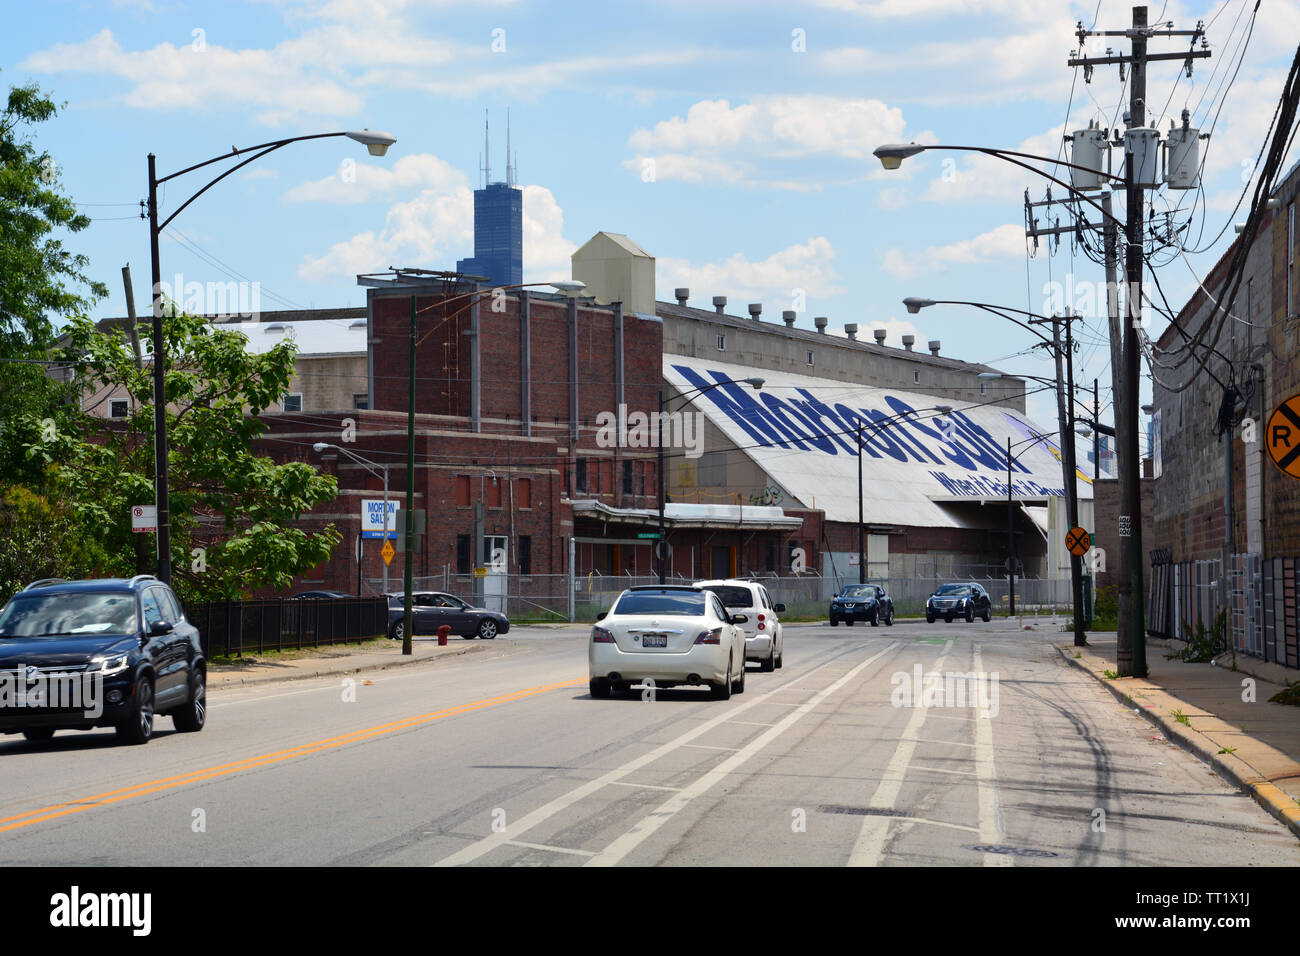 The old Morton Salt warehouse on Elston Ave in Chicago will keep it's iconic roof sign as it undergoes redevelopment into a research facility Stock Photo